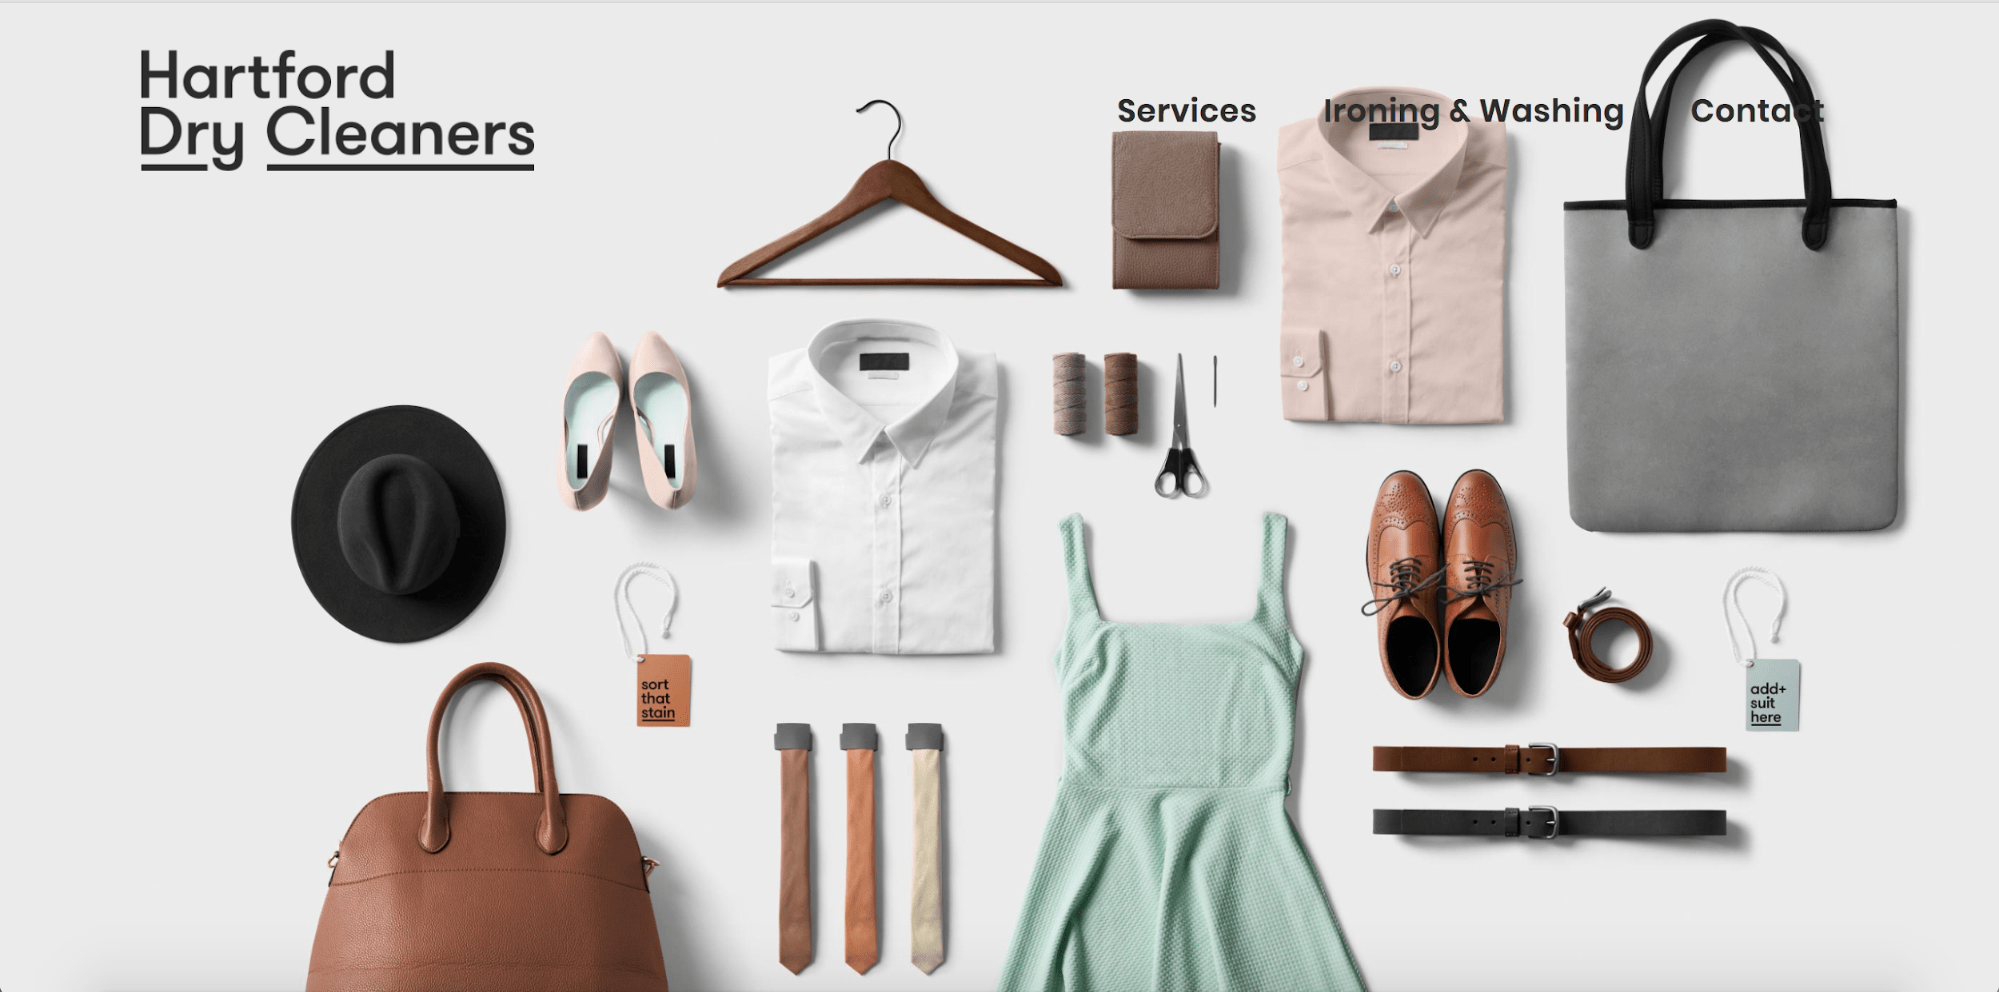 hartford dry cleaners website, muted color scheme for website